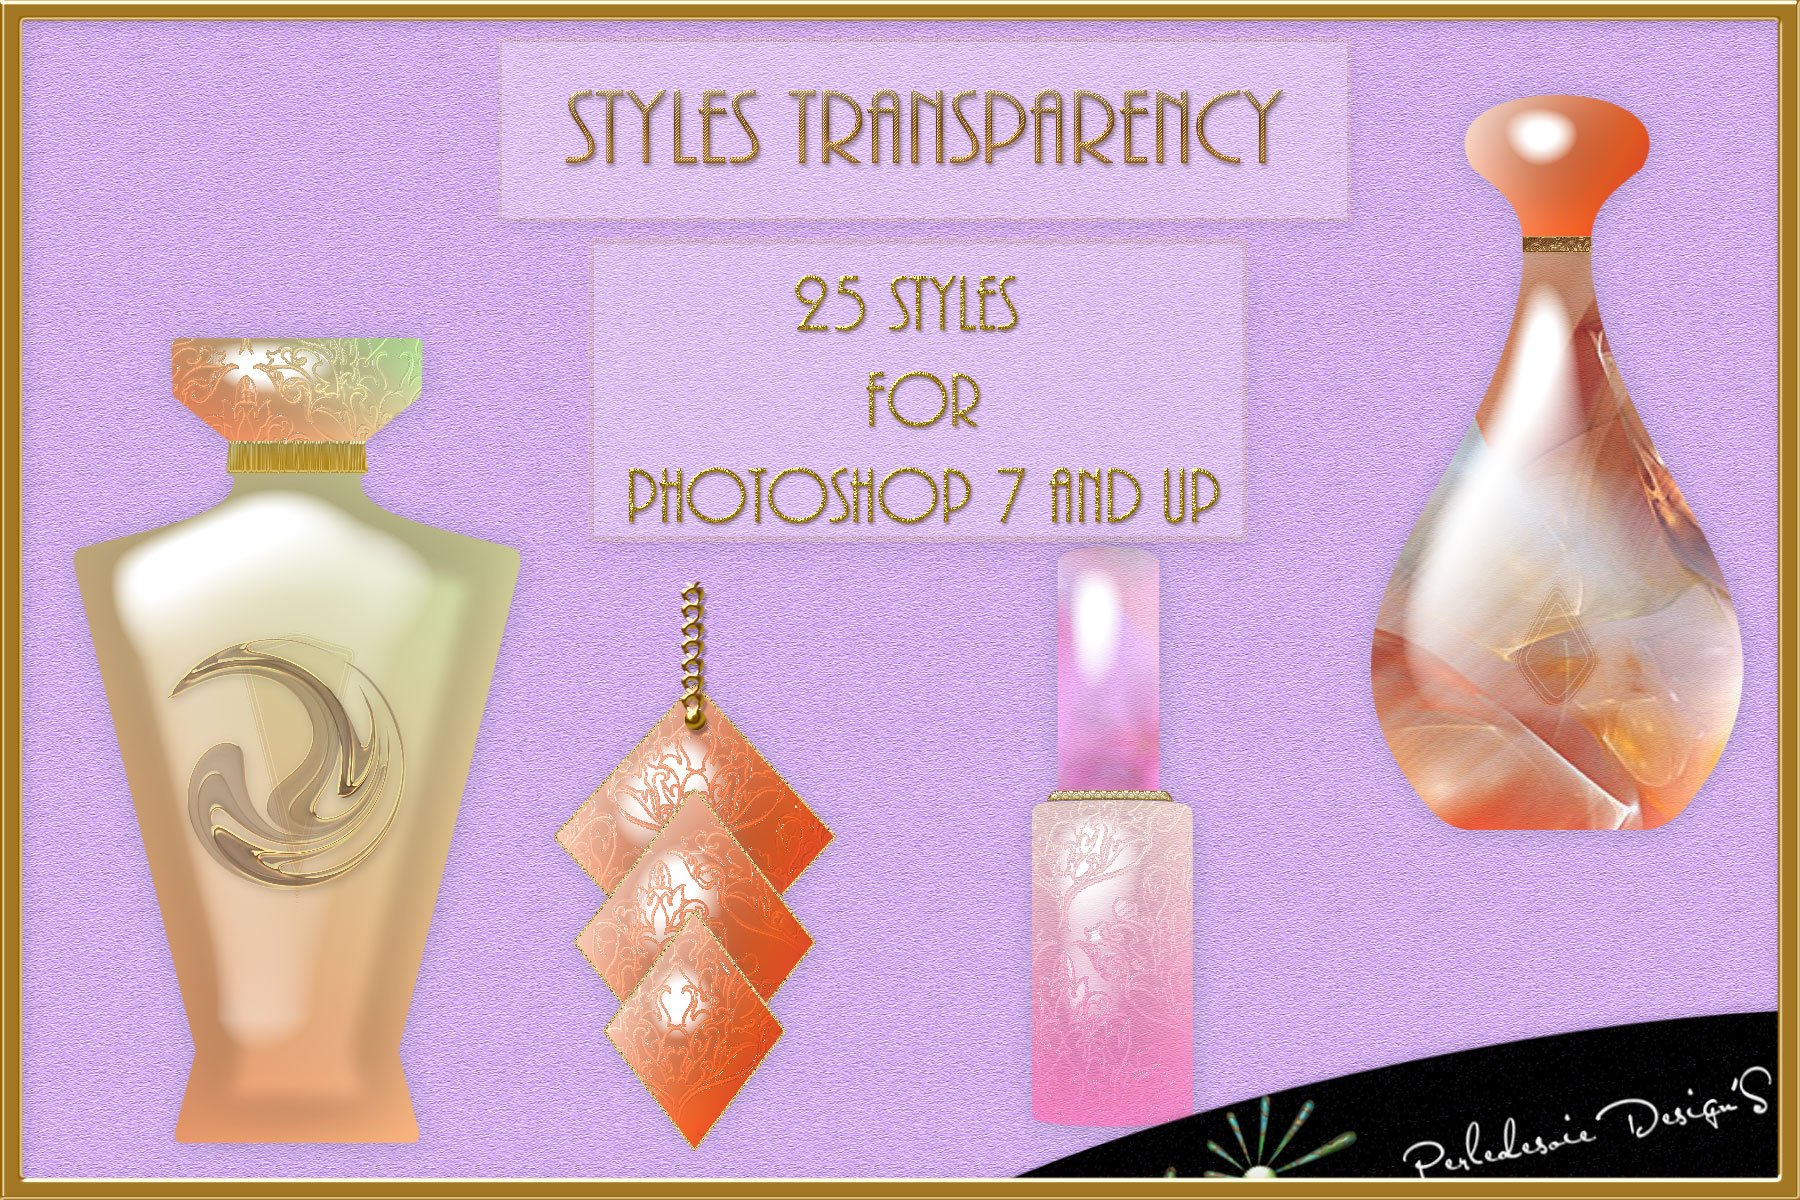 Styles Transparencypreview image.